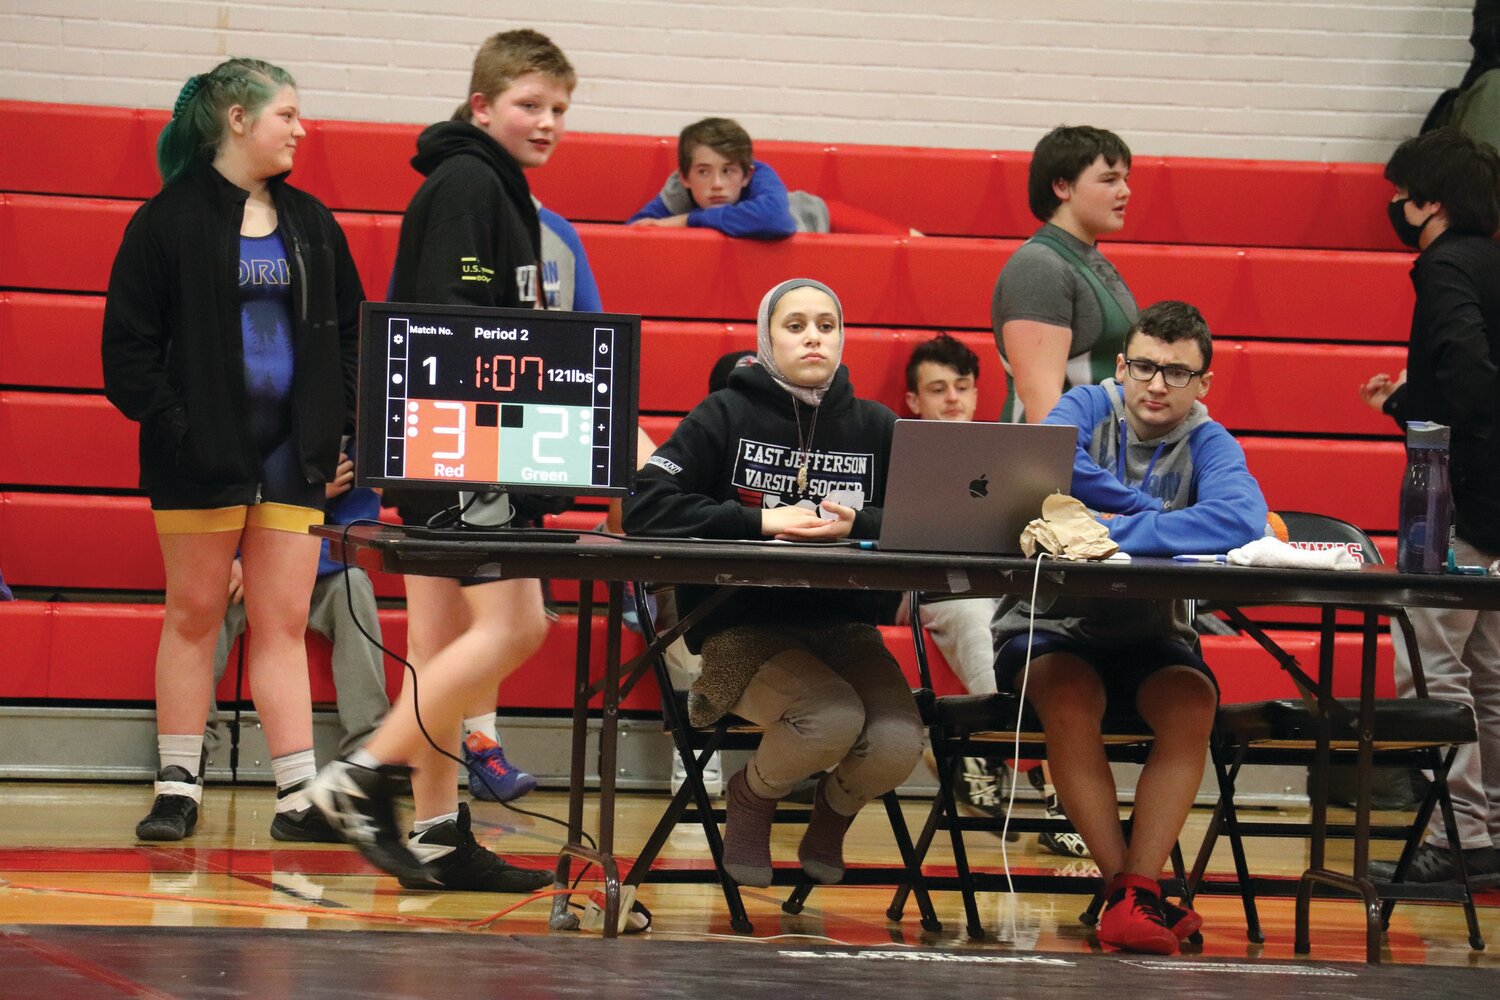 Mi Amada Lanphear Ramirez and Blue Heron Middle eighth-grader Damien Ilarraza run the score table at a middle school meet, with Lanphear Ramirez operating as assistant coach for the youth grapplers throughout the season.